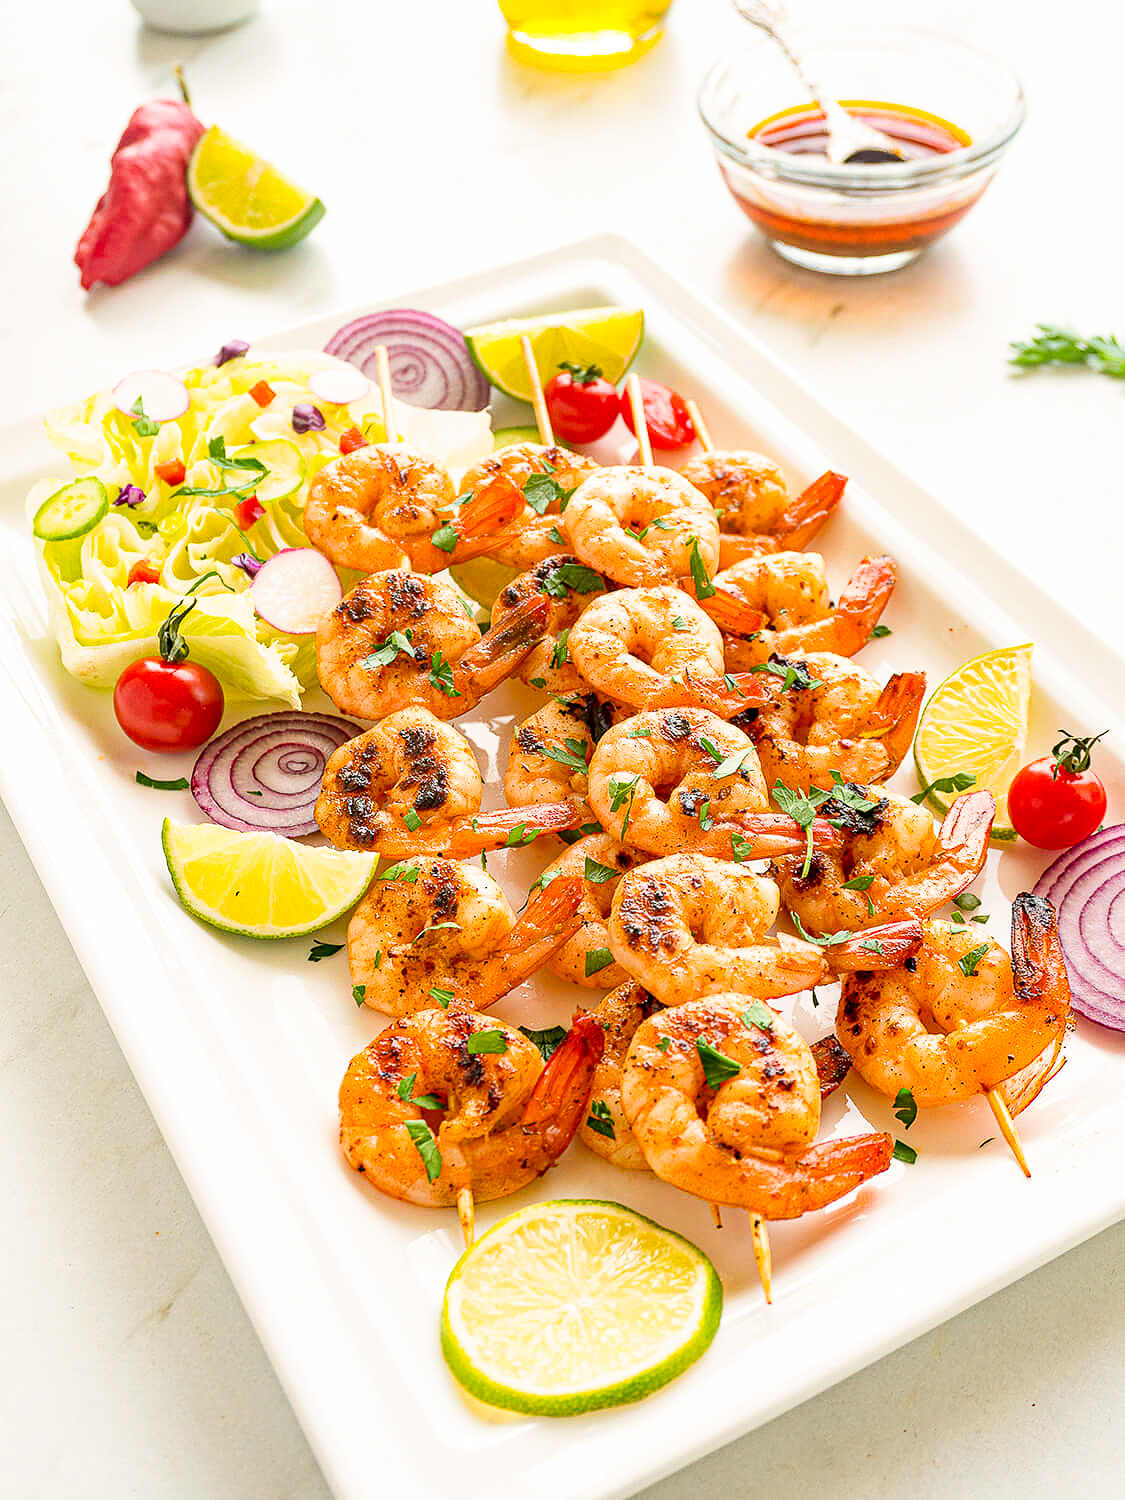 Try this simple recipe for grilled chili lime shrimp, with a spicy and tangy marinade that goes great with tacos, burritos or fajitas!